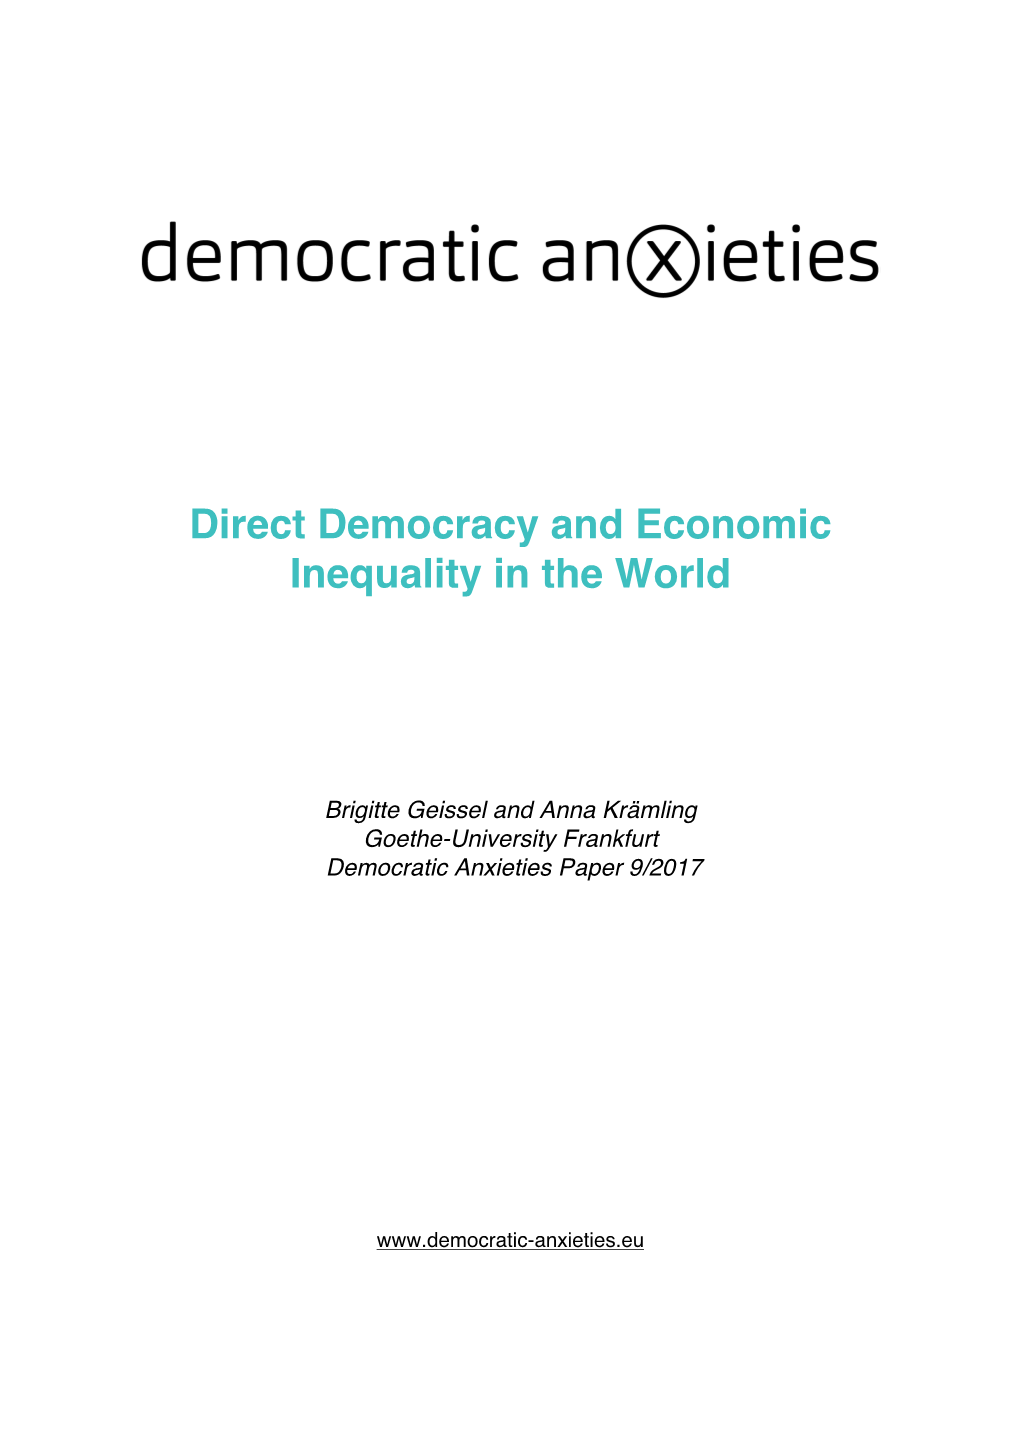 Direct Democracy and Economic Inequality in the World